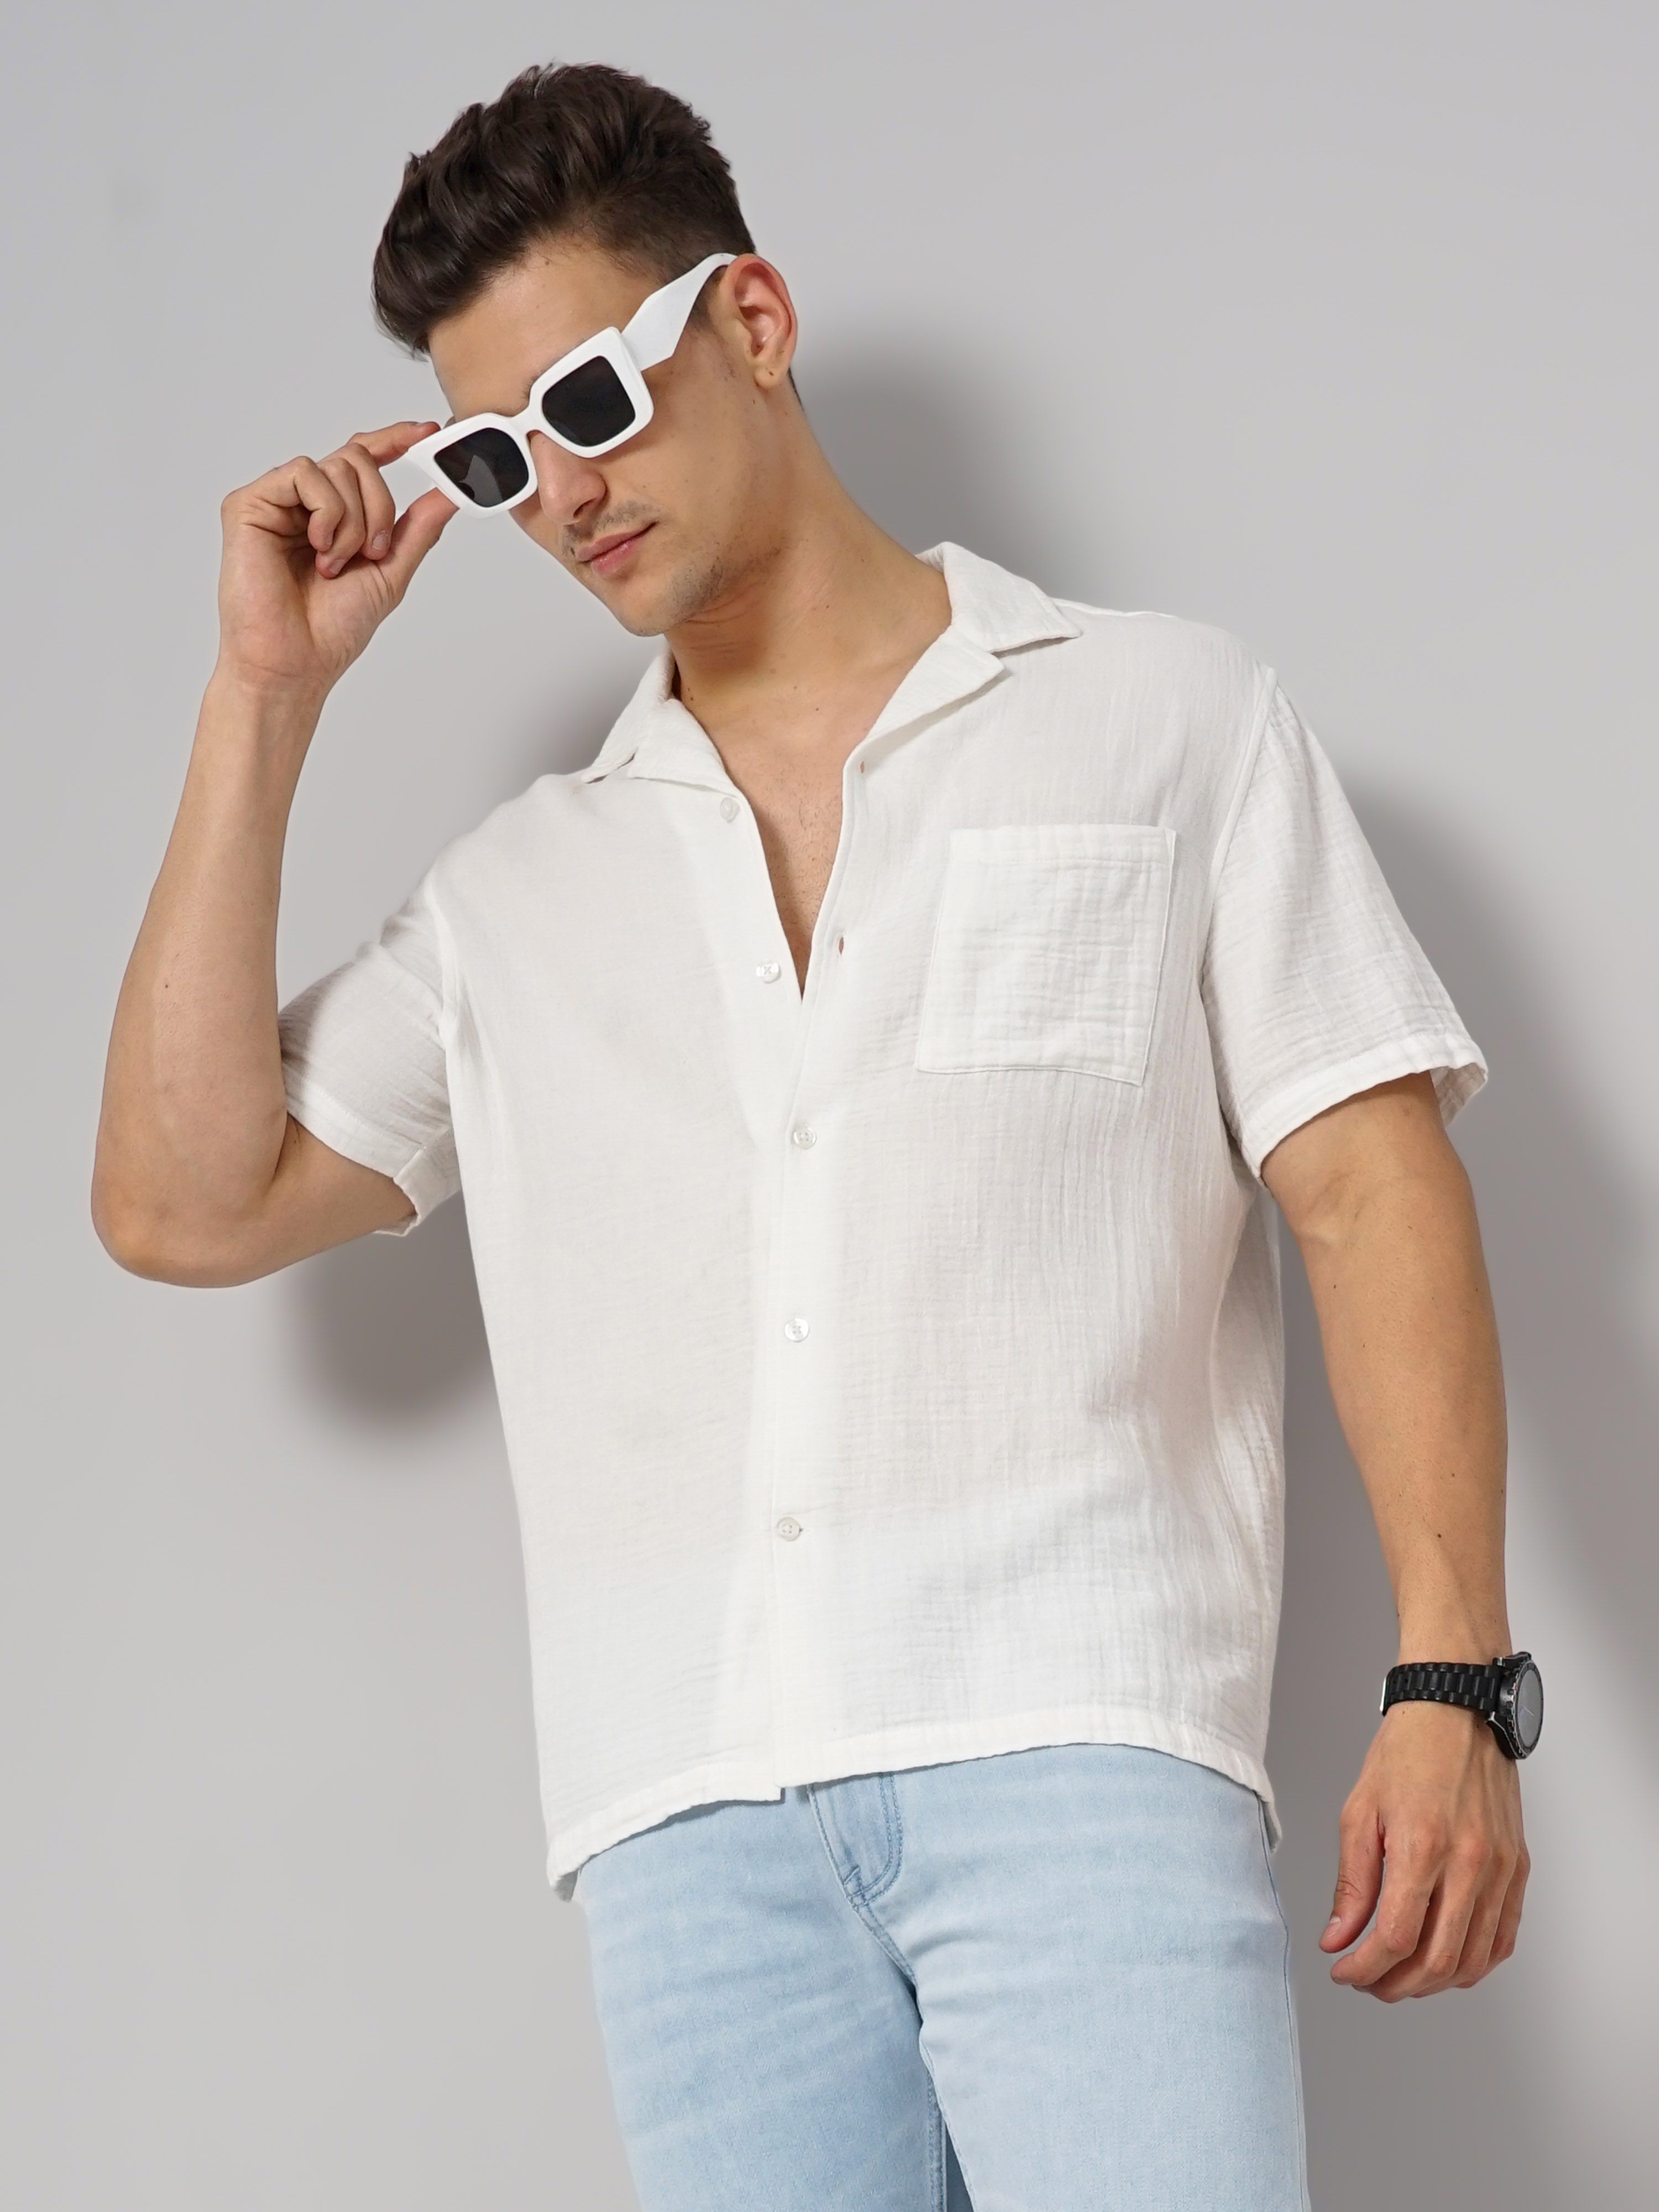 Men's White Solid Casual Shirts